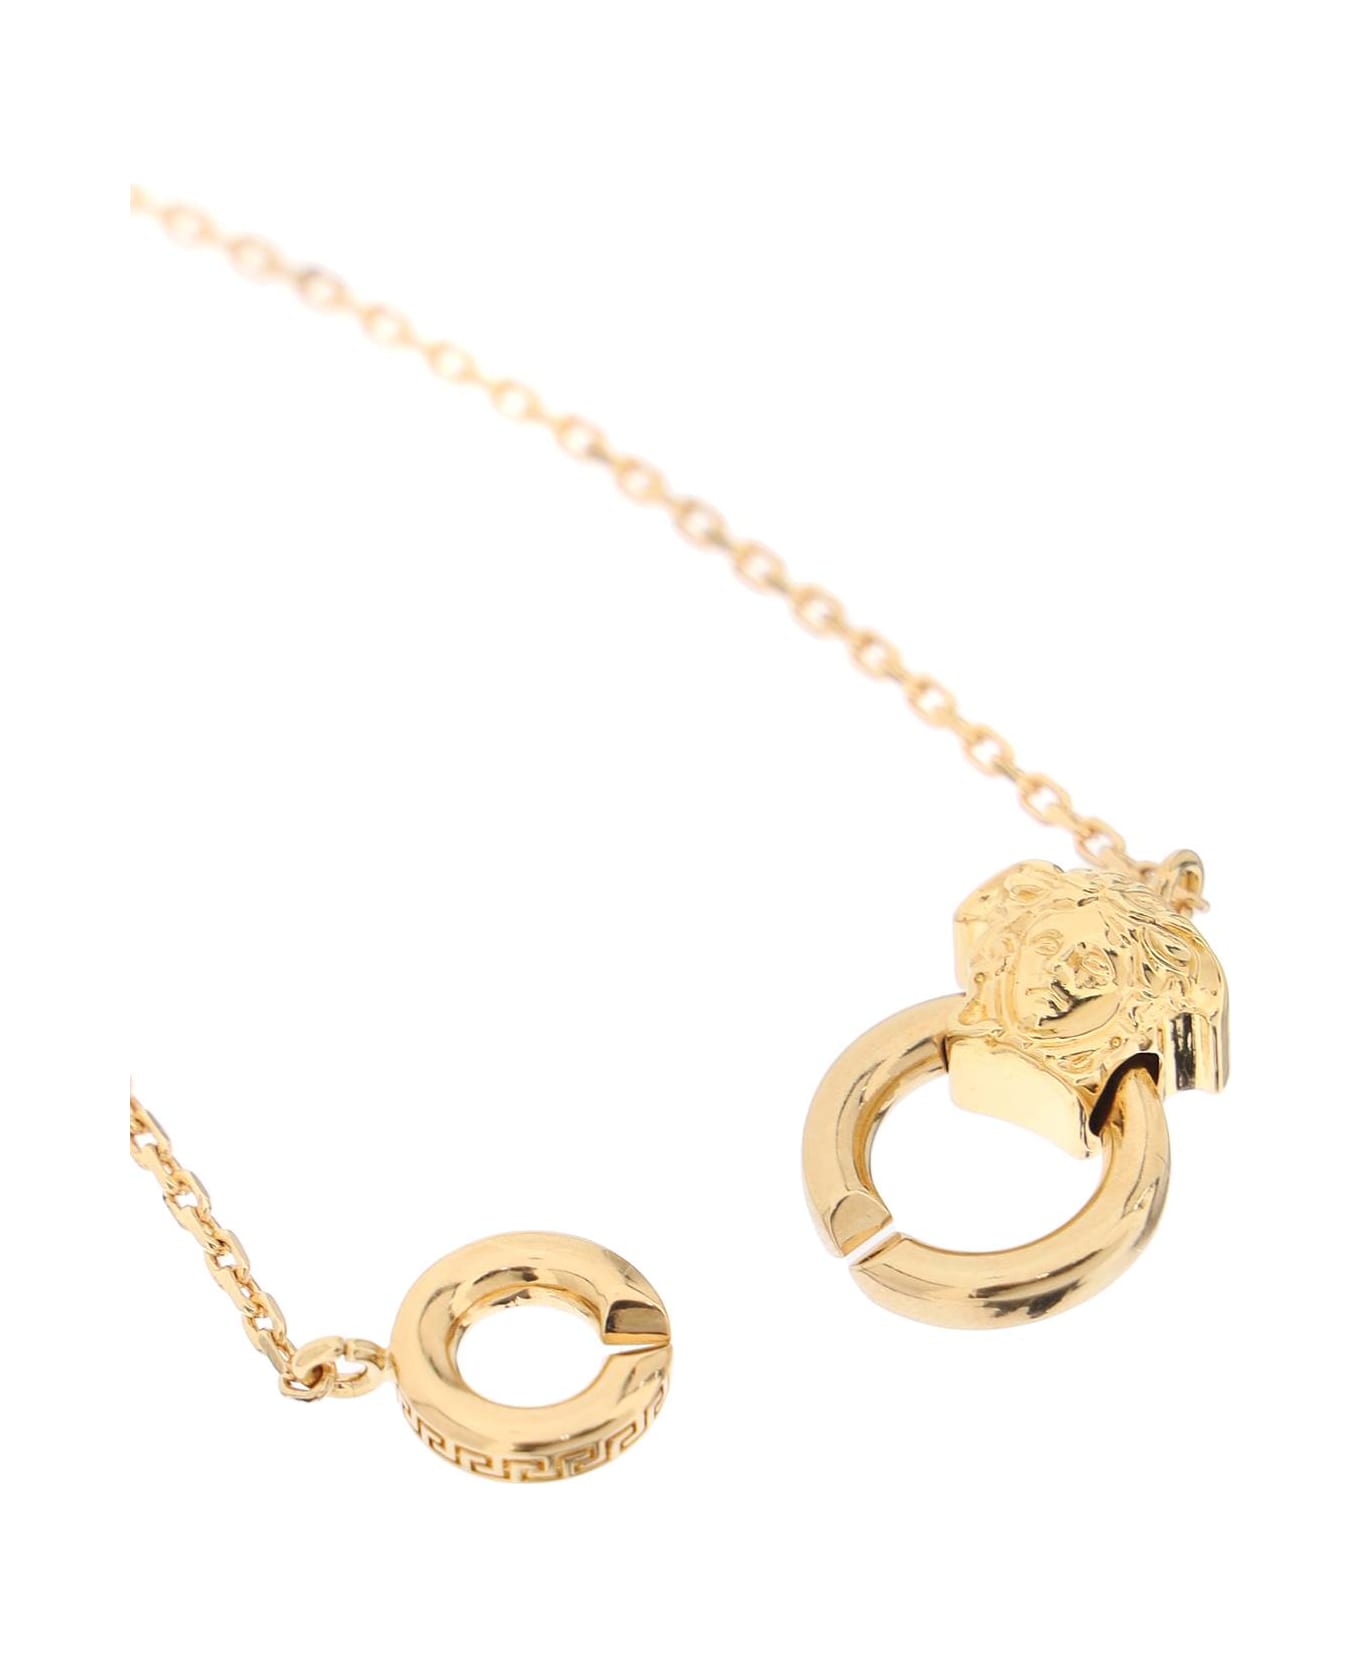 Versace Medusa Rolo-chained Polished Finish Necklace - VERSACE GOLD (Gold)